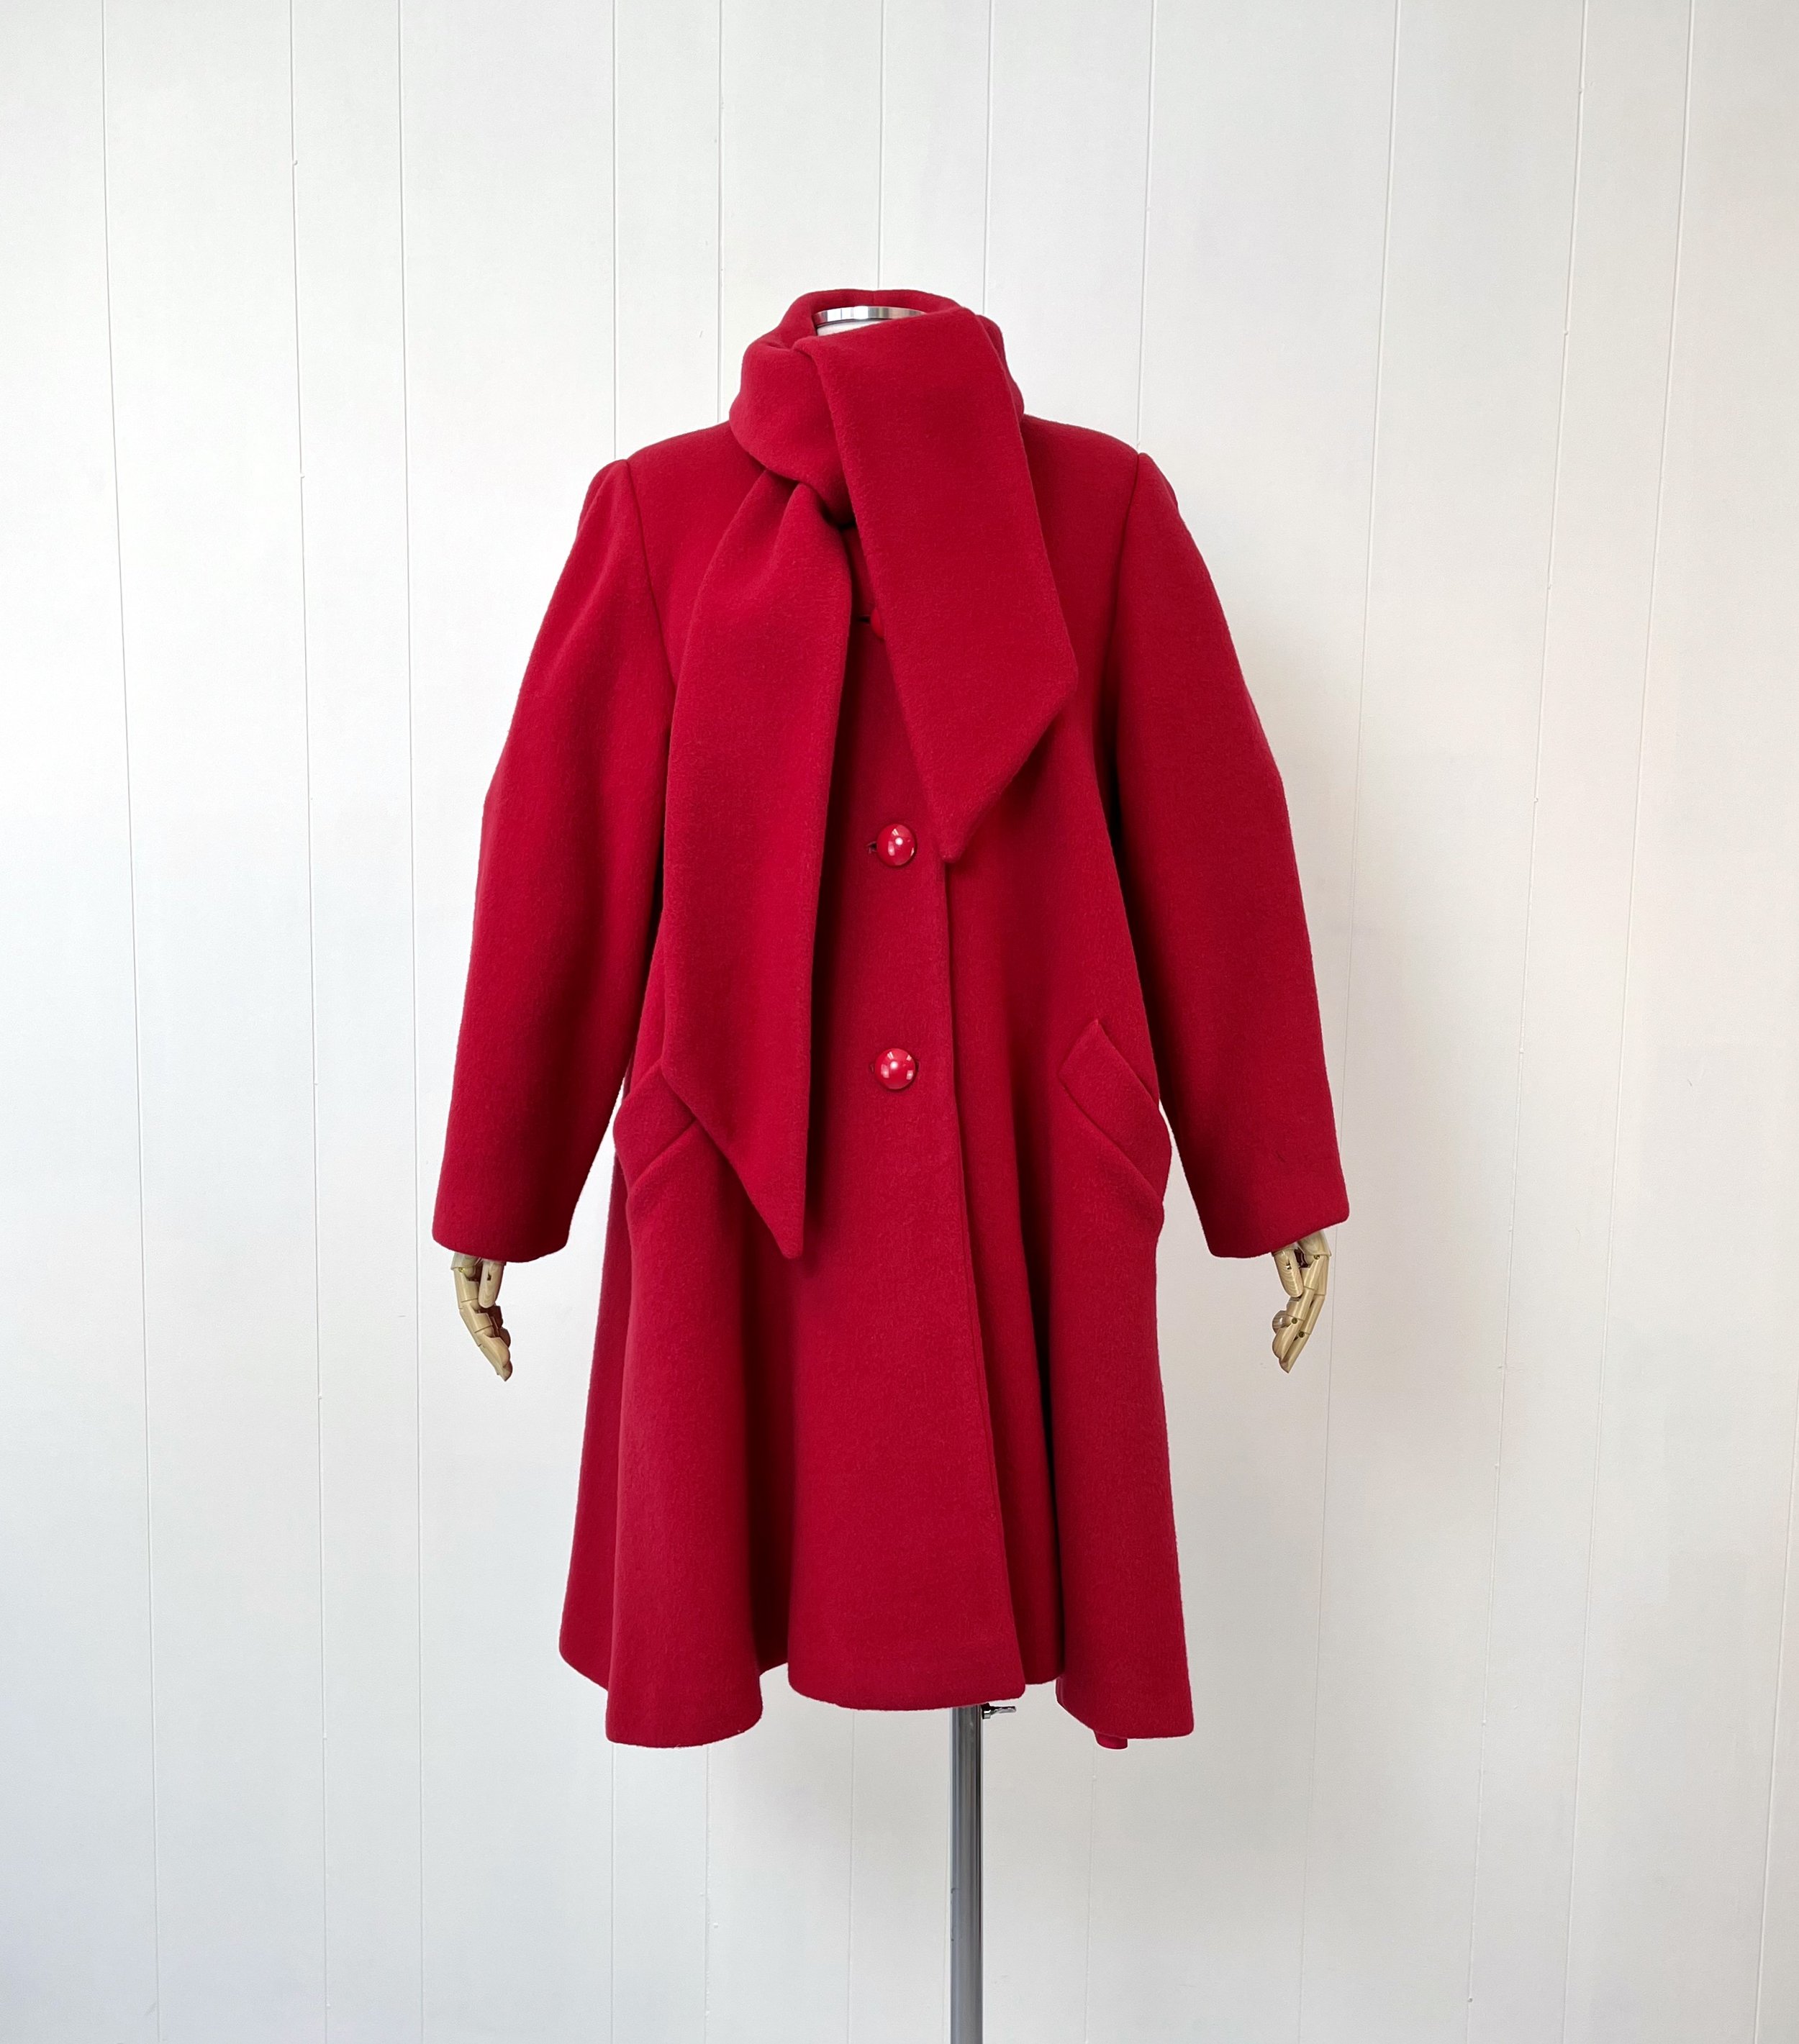 1970s/1980s Christian Dior Berry Red Wool Coat Jacket — Canned Ham ...